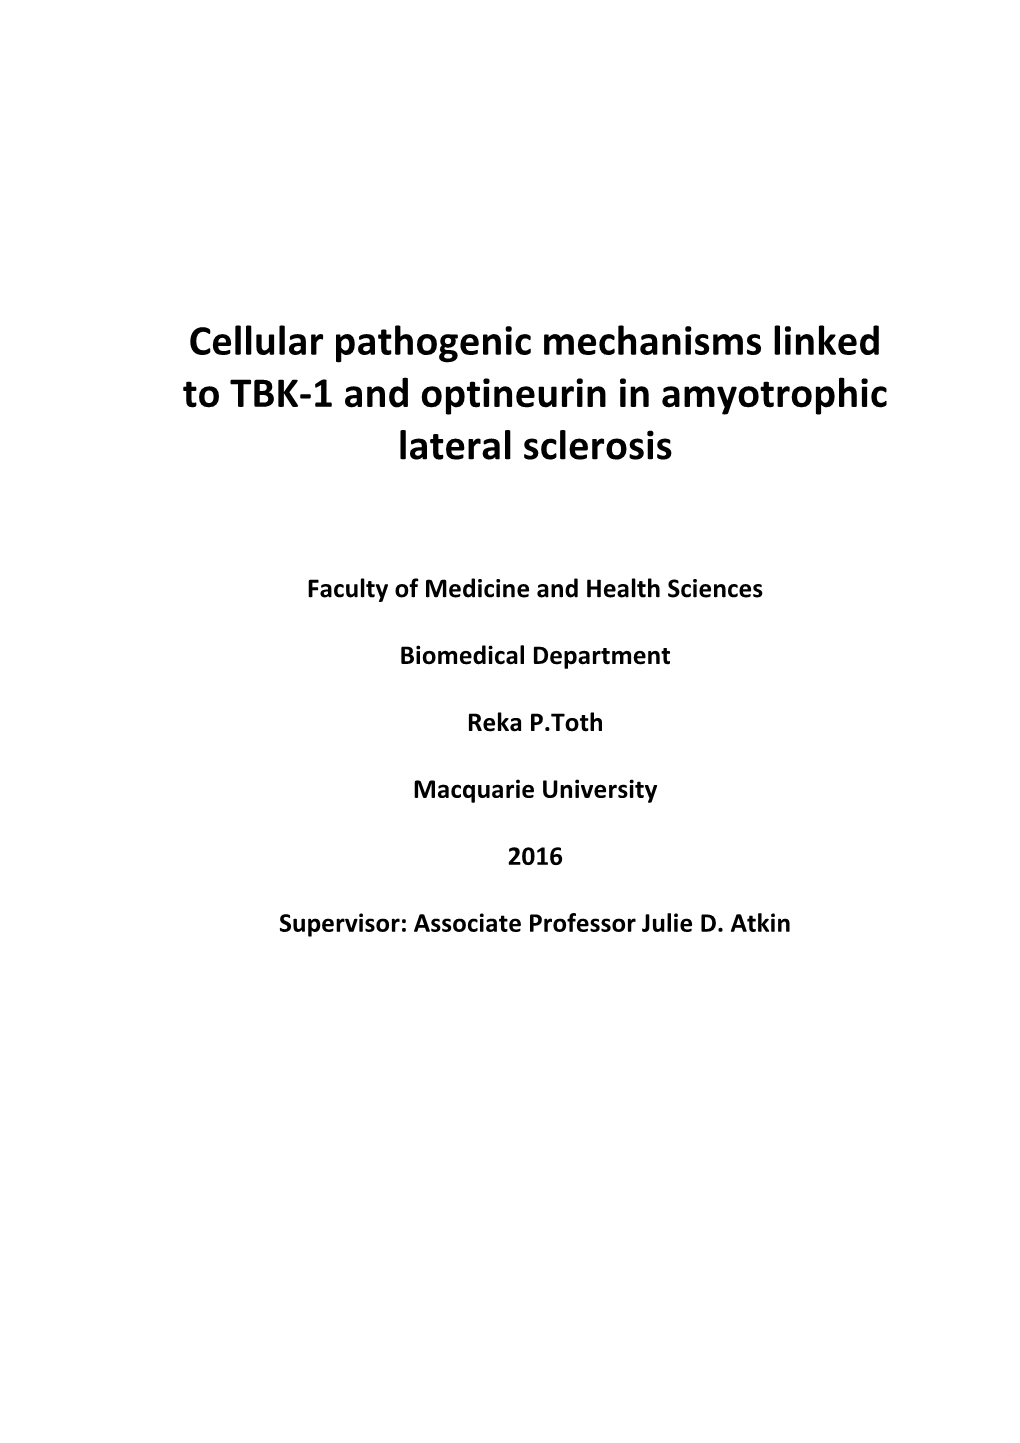 Cellular Pathogenic Mechanisms Linked to TBK-1 and Optineurin in Amyotrophic Lateral Sclerosis